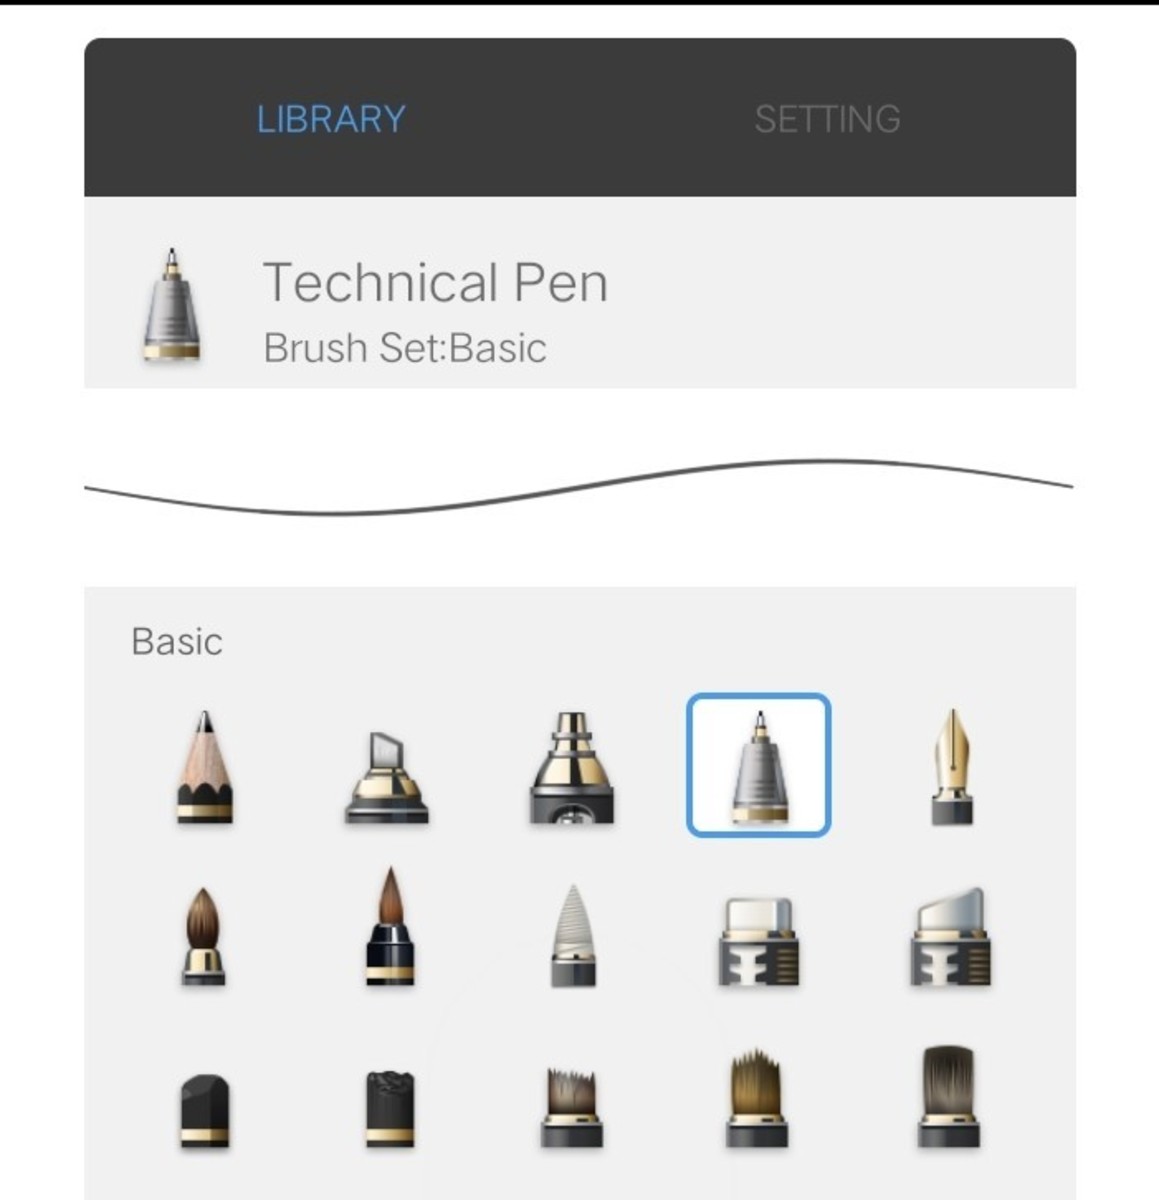 Technical pen - for fine markings and lines.